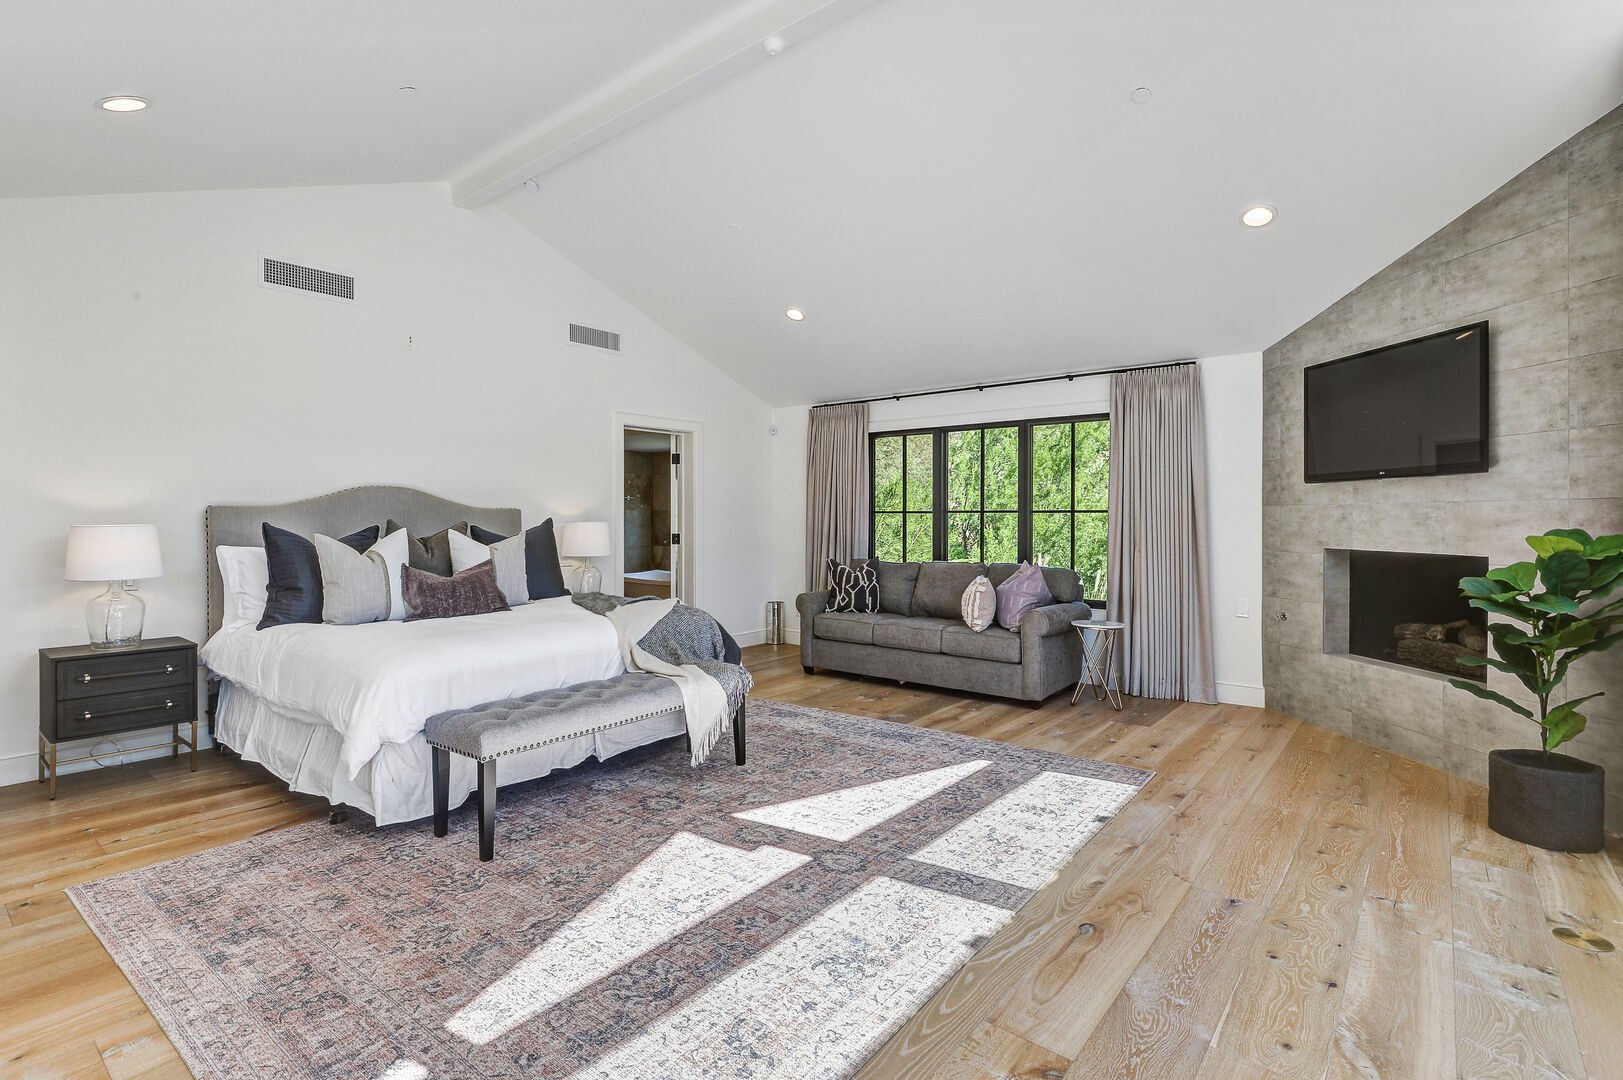 The expansive master bedroom in the east wing, featuring views of the fireplace, TV, and a queen sofa sleeper.